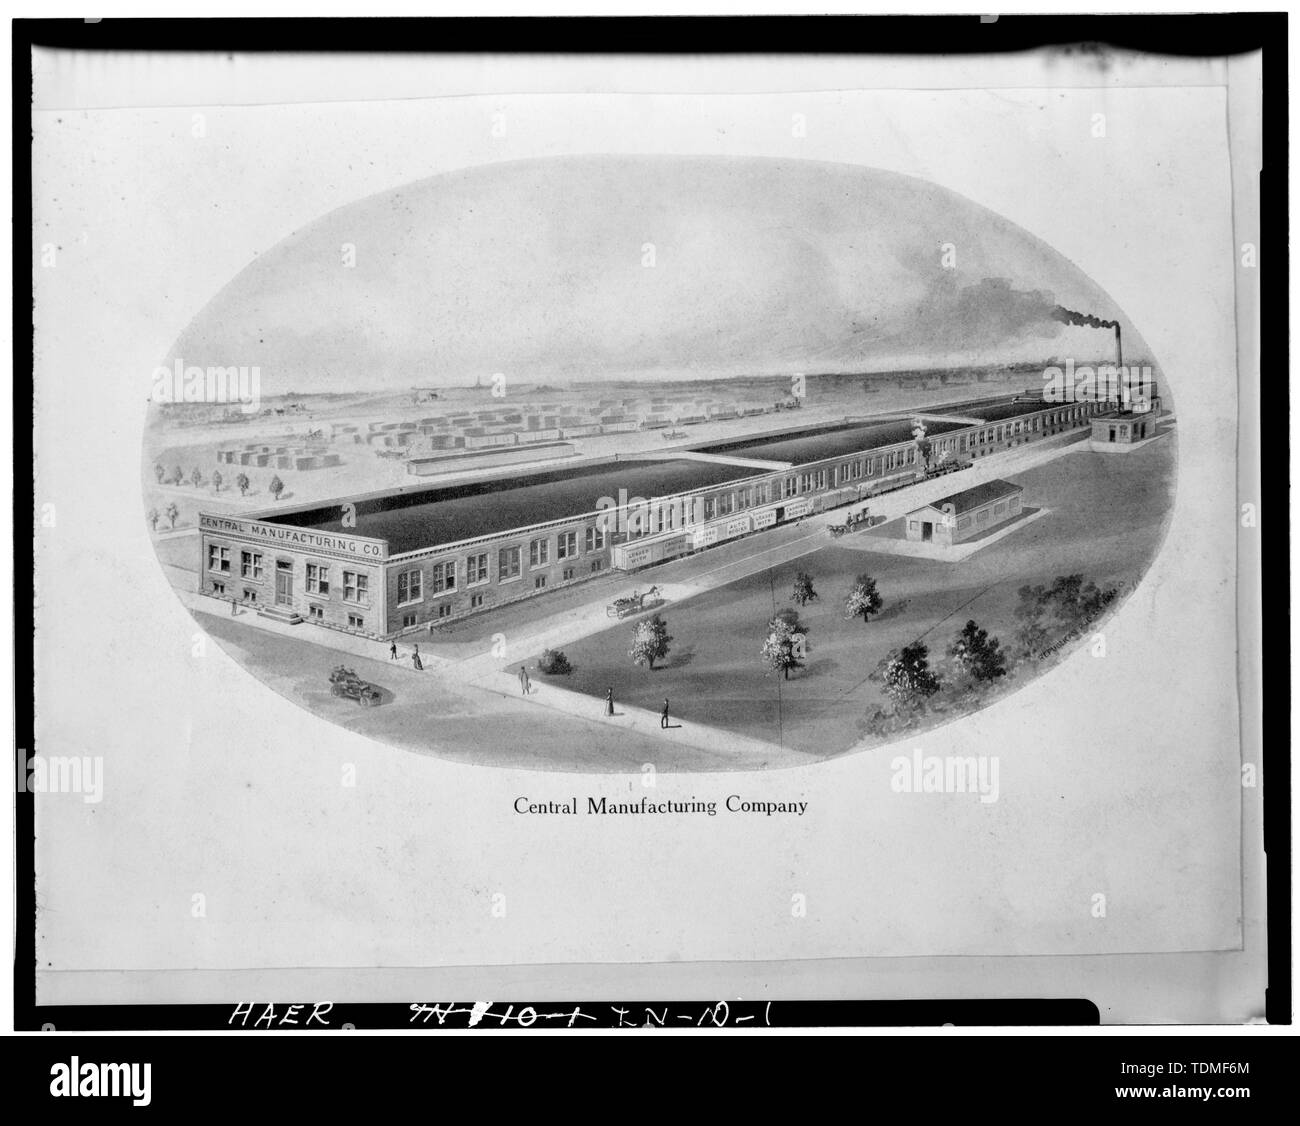 PHOTOCOPY OF CA. 1906 LITHOGRAPHIC VIEW FROM COLLECTION OF HENRY BLOMMEL, CONNERSVILLE, INDIANA - Central Manufacturing Company, Eighteenth Street, Connersville, Fayette County, IN; Ansted, Edward W; Ansted, William B; Rosenberg, Robert; Sackheim, Donald Stock Photo